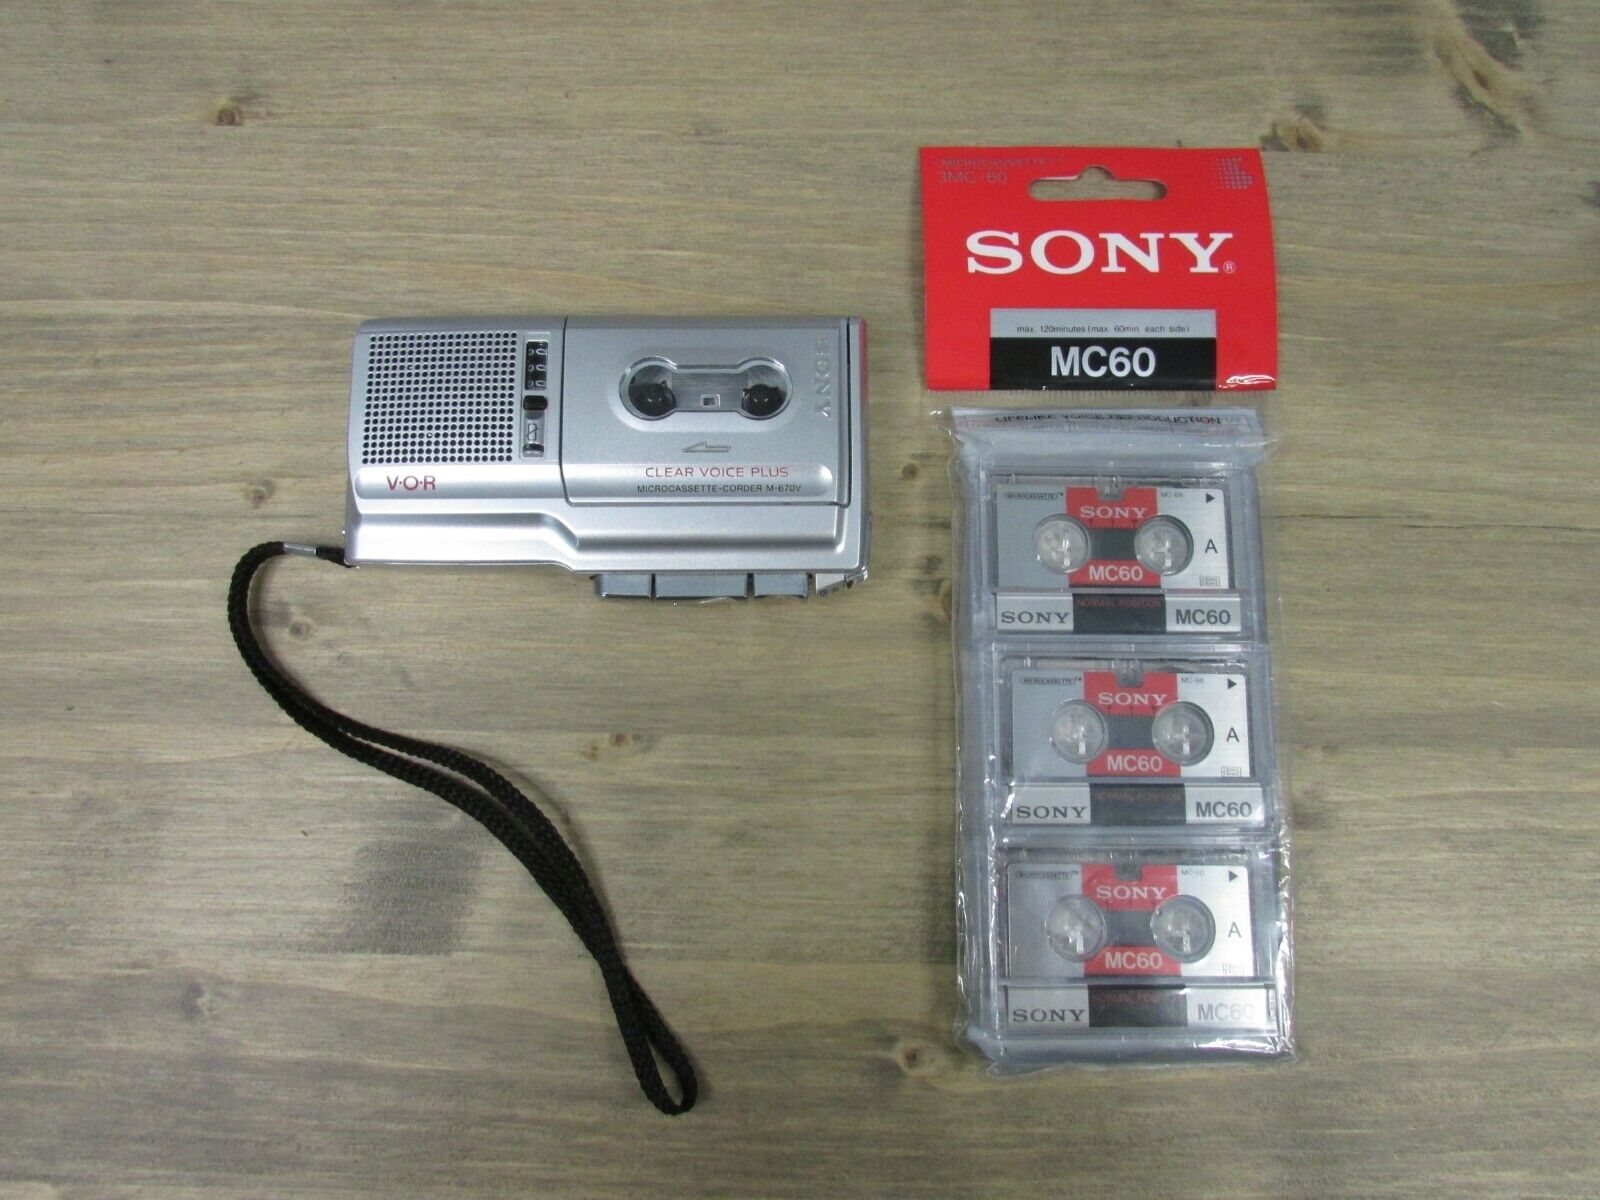 Sony Voice Recorder Clear Voice Plus & VOR Microcassette Recorder M-670V + Tapes